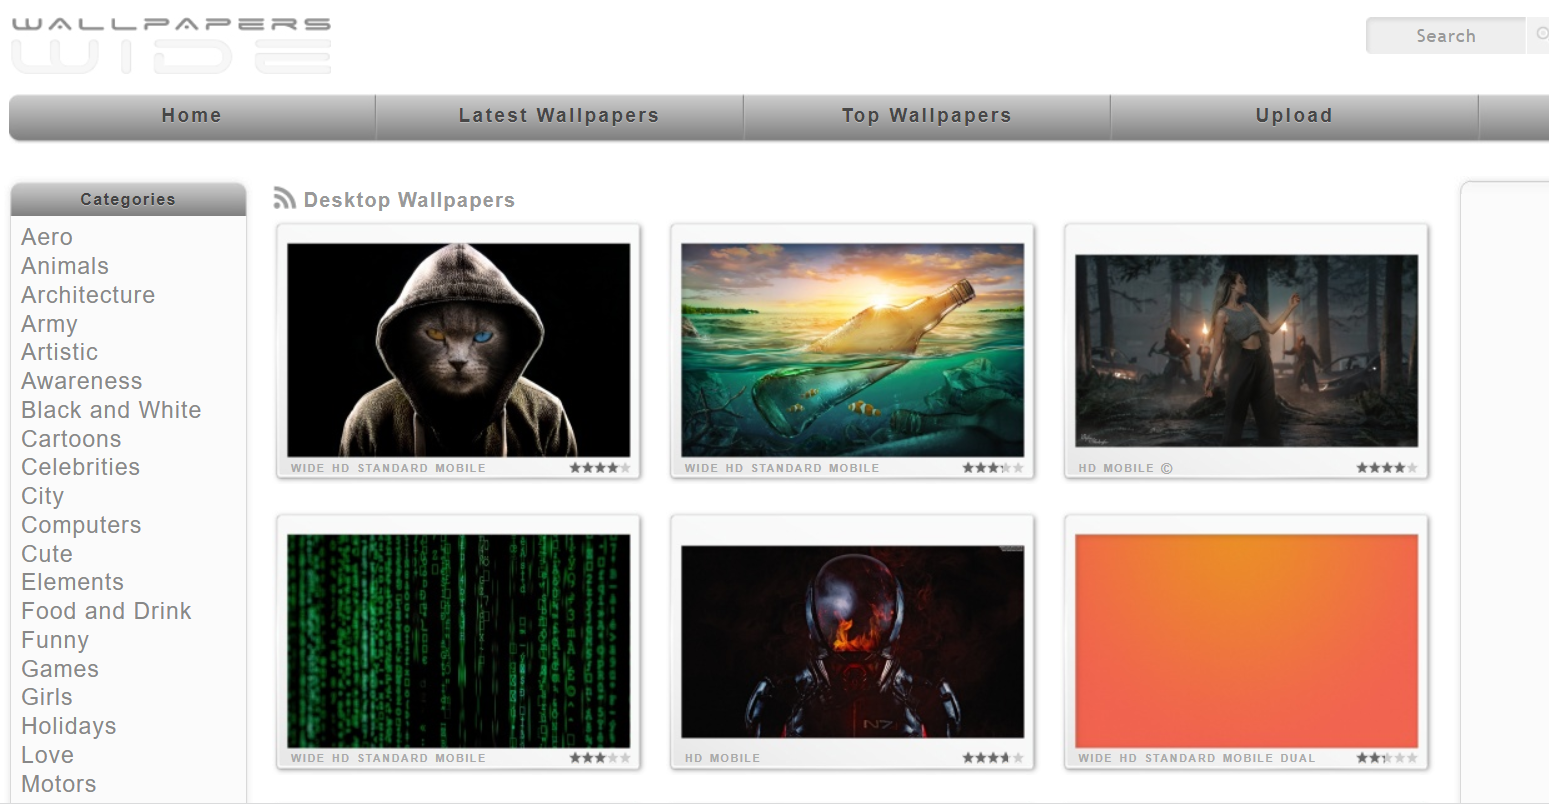 WallpapersWide.com is a wallpaper site dedicated to widescreen monitors, as the name implies.